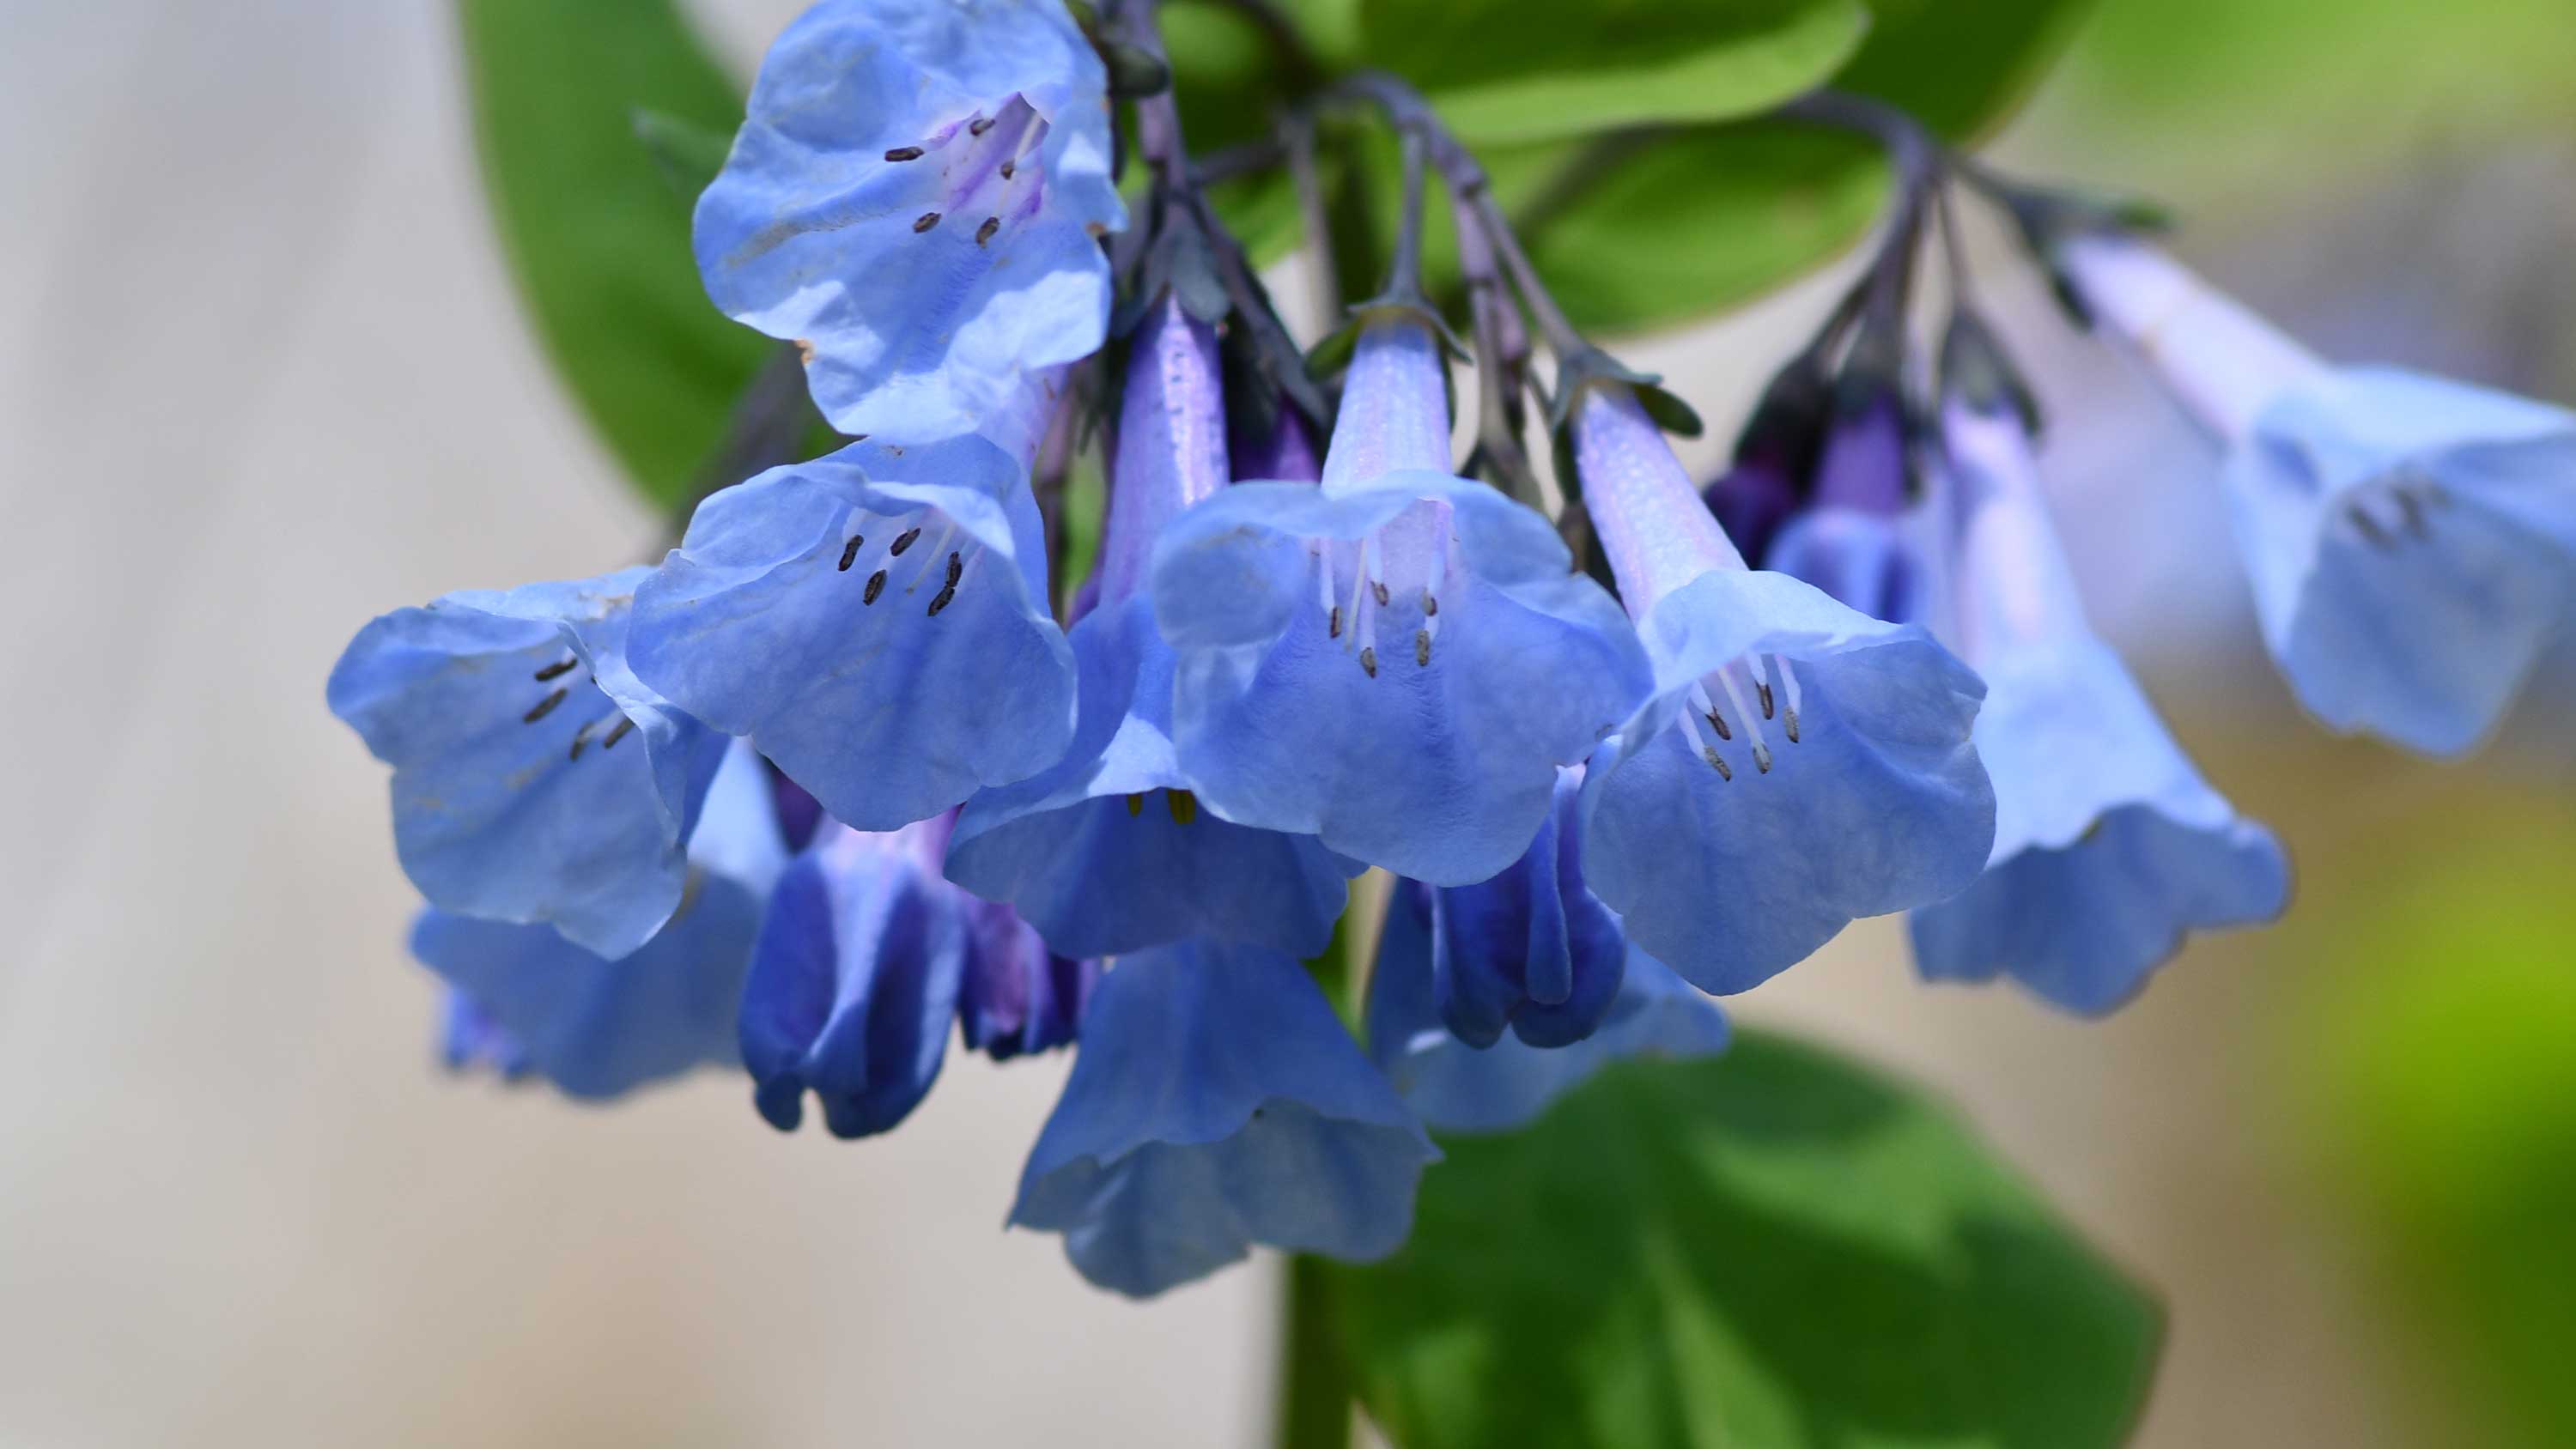 The blue blooms of Virginia bluebells hang off the stem.